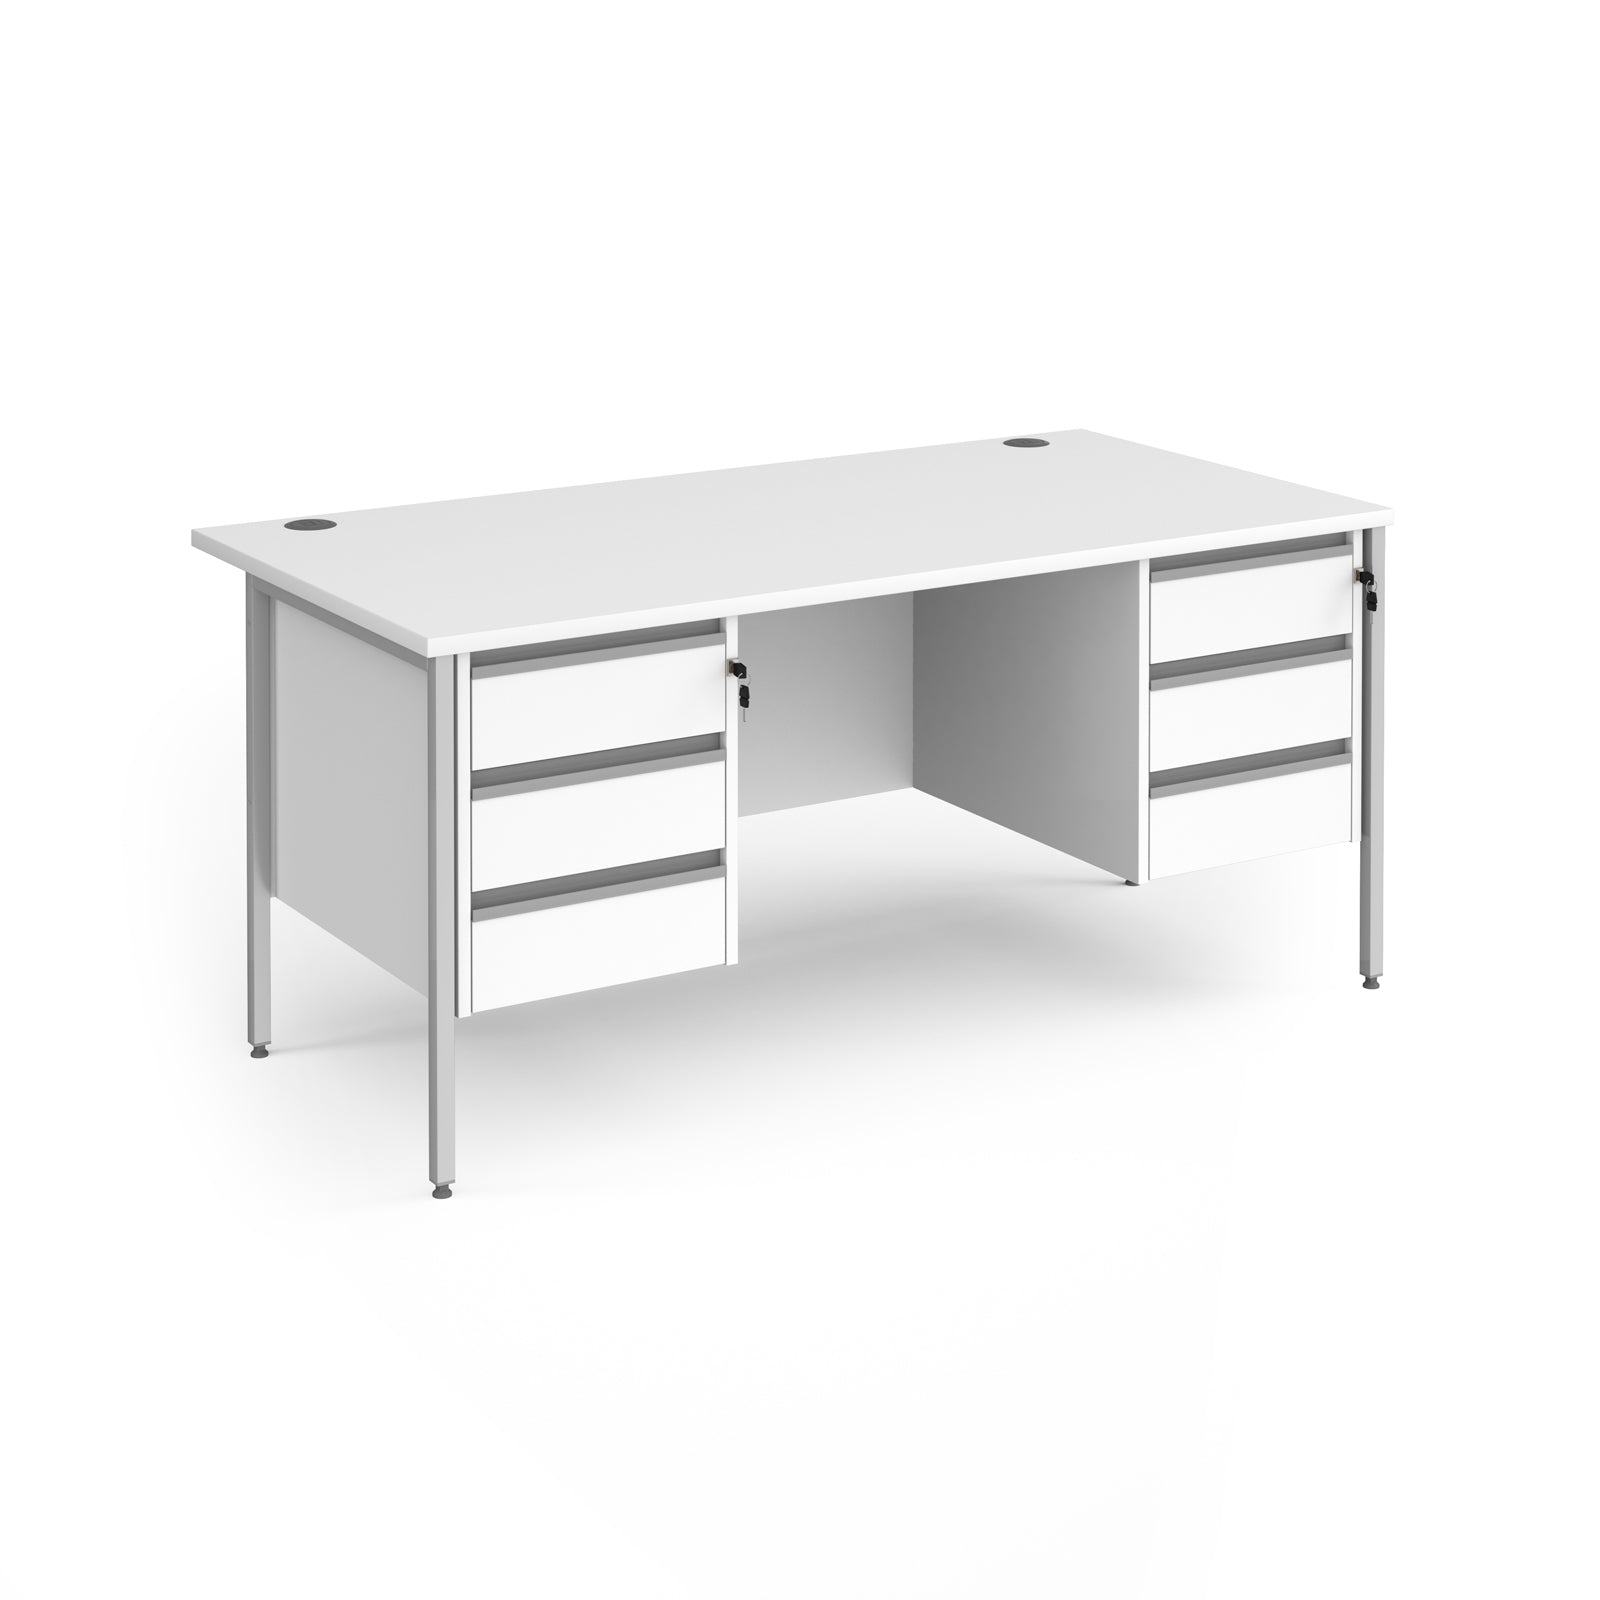 Chicago Desk with H-Frame Legs - 3 and 3 Pedestals